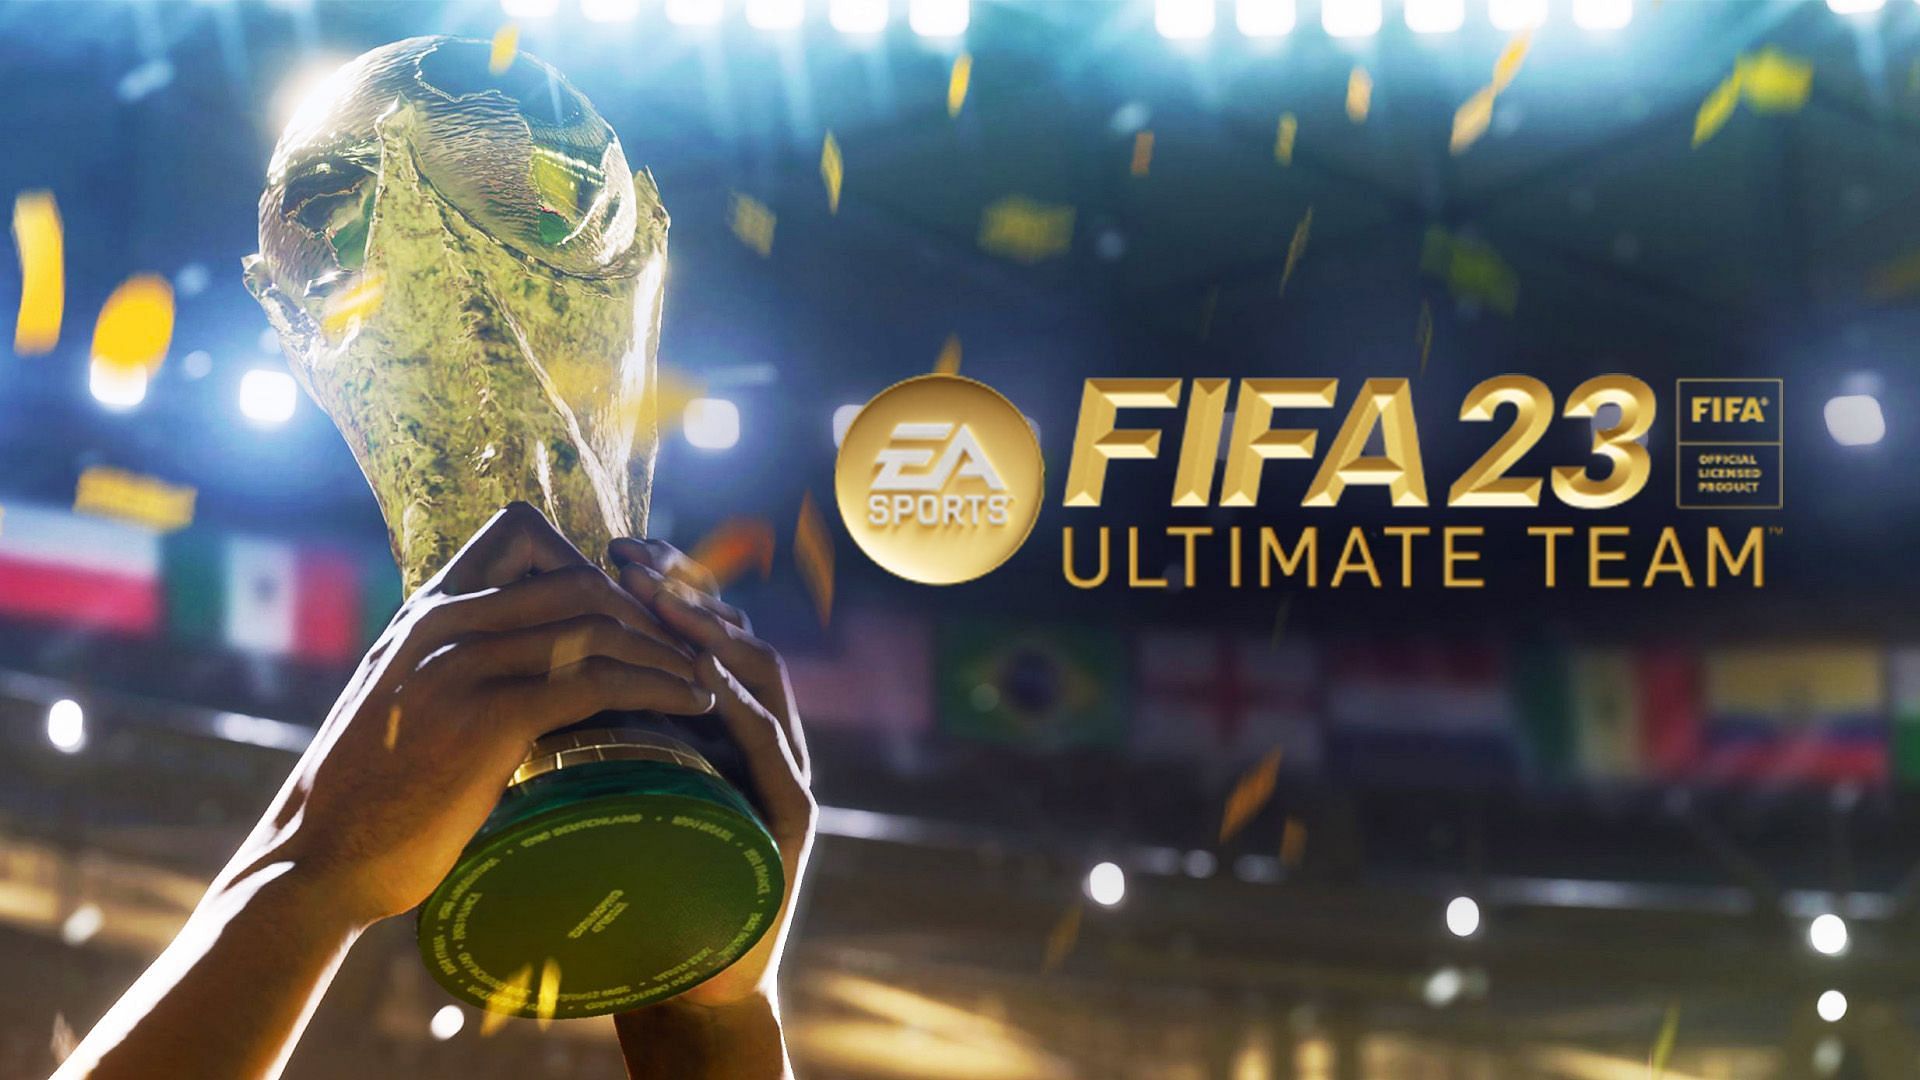 FIFA Ultimate Team  AKA FUT is known for its engaging game mode of each FIFA editions (Image via EA Sports))